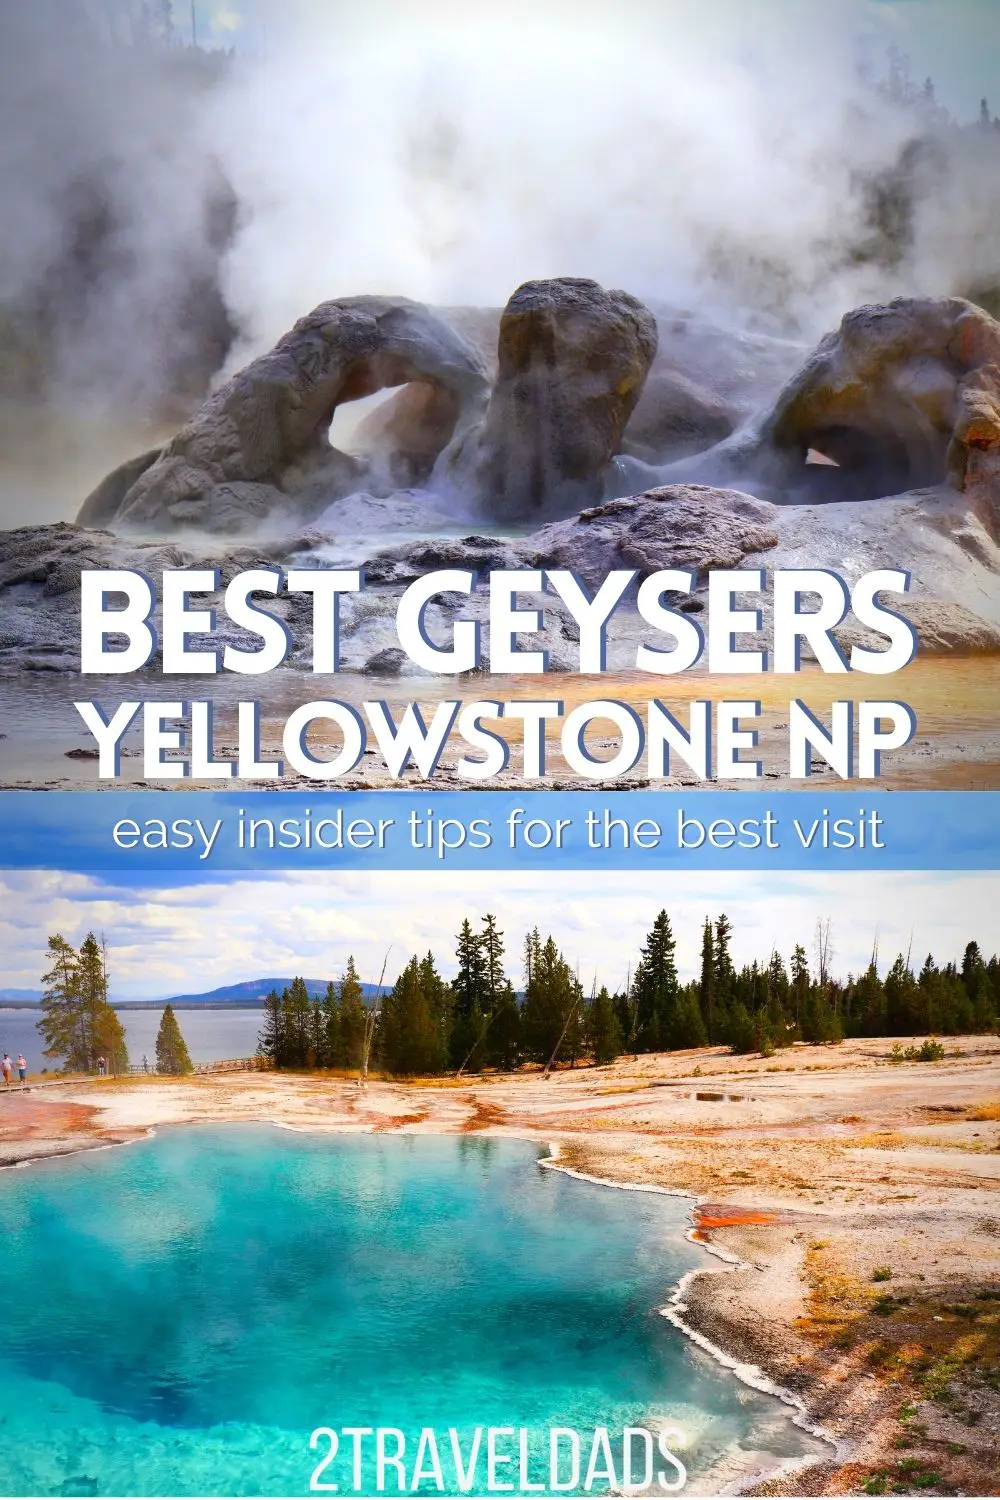 Best geyser recommendations in Yellowstone National Park. Must-see hot springs and geysers that most people miss when they visit Yellowstone. Podcast Episode reviewing geothermals.